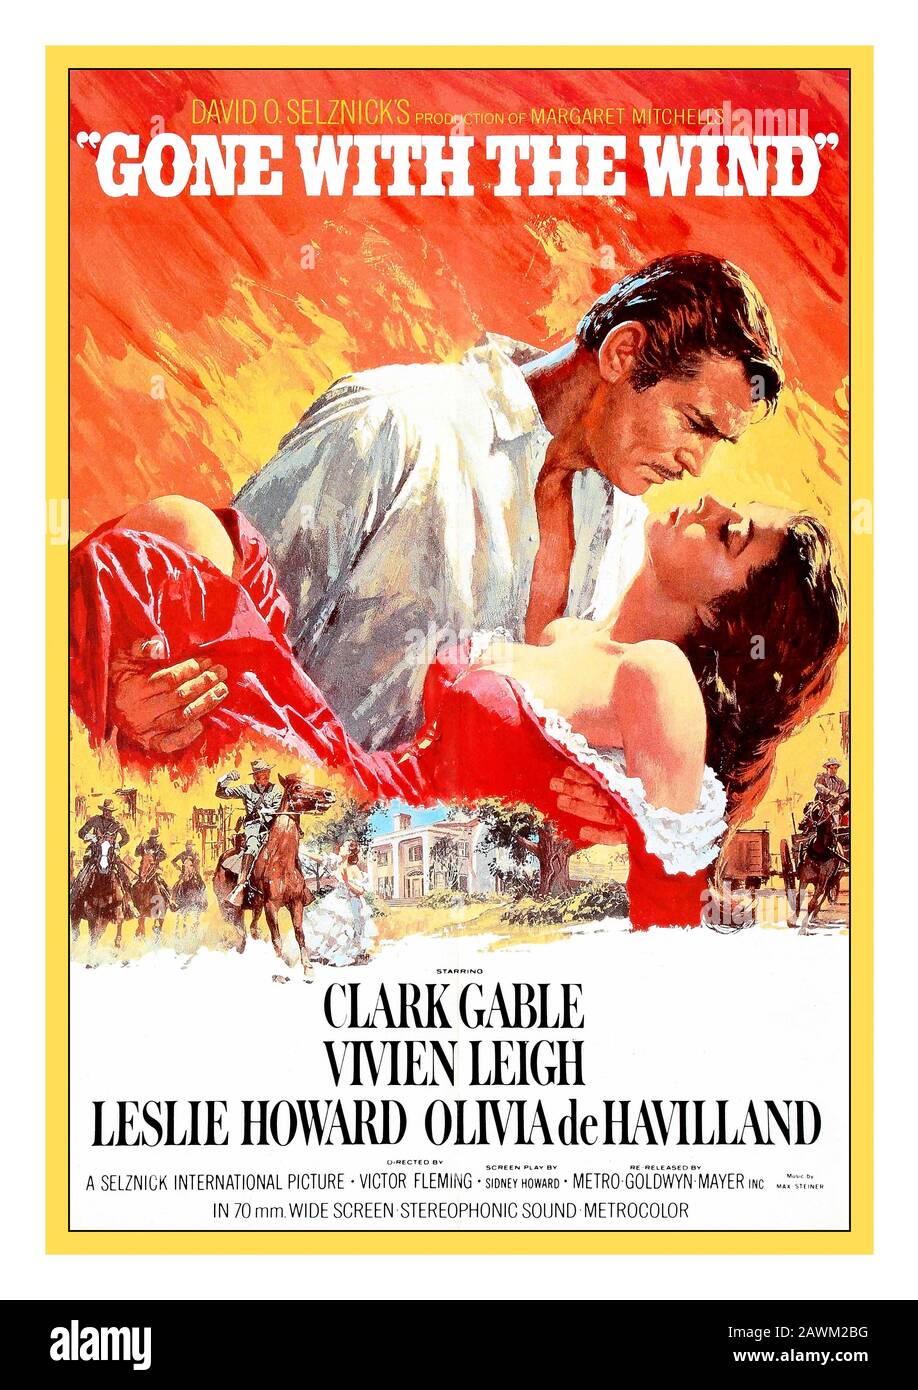 GONE WITH THE WIND 1930’s Vintage Movie Film Poster  1939, M.G.M., USA by artist Armando Seguso  Gone with the Wind is a 1939 American epic historical romance film adapted from the 1936 novel by Margaret Mitchell. The film was produced by David O. Selznick of Selznick International Pictures and directed by Victor Fleming. The leading roles are played by Vivien Leigh (Scarlett), Clark Gable (Rhett), Leslie Howard (Ashley), and Olivia de Havilland (Melanie). Stock Photo